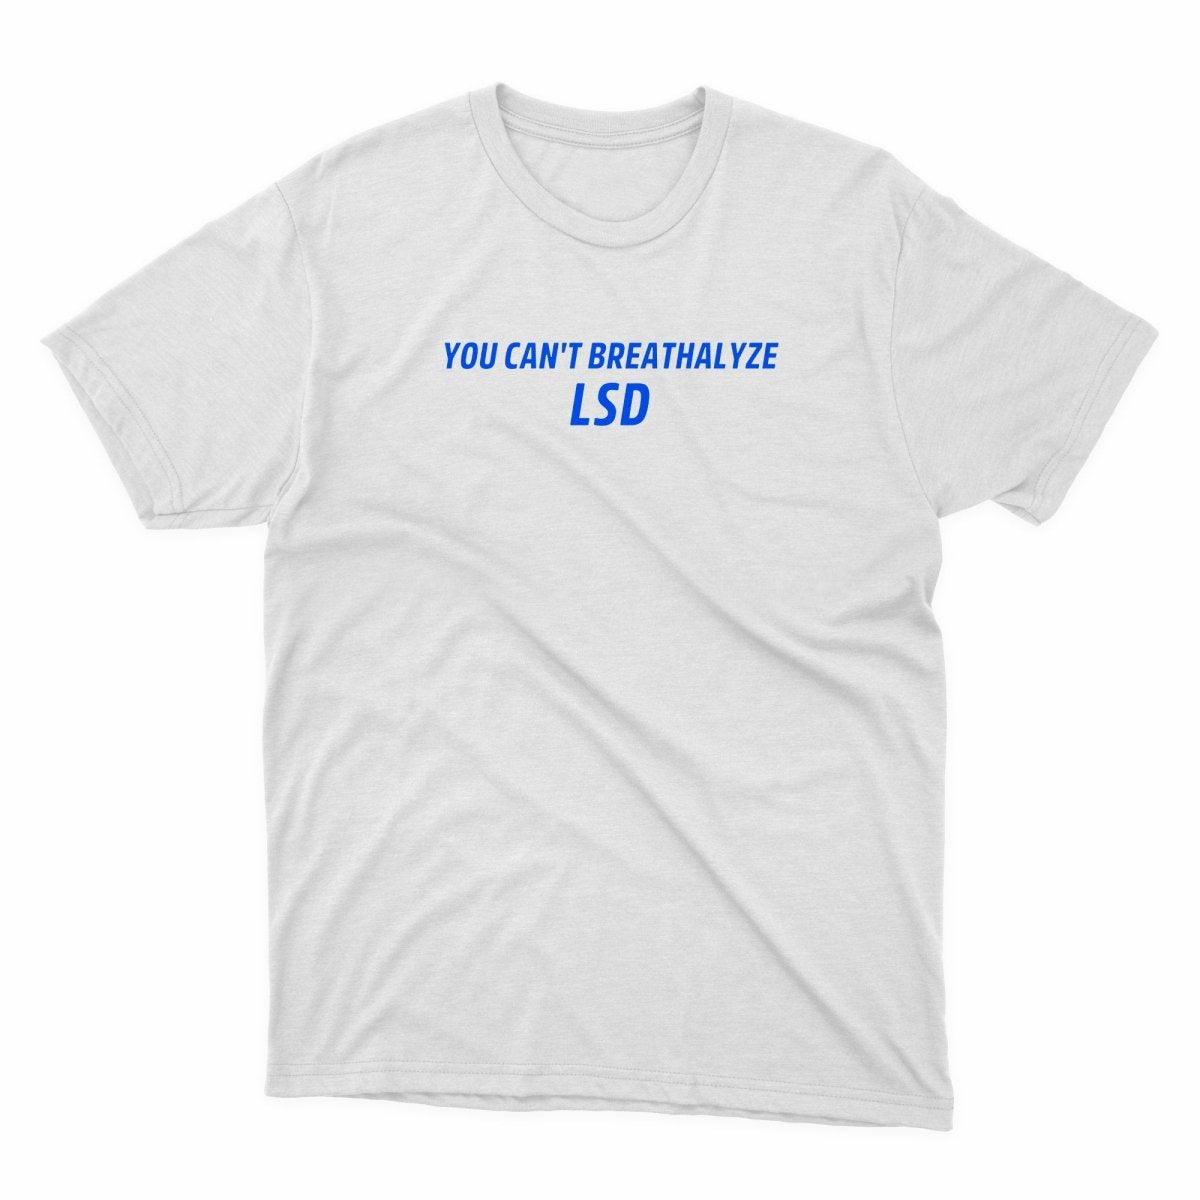 You Can't Breathalyze LSD Shirt - stickerbullYou Can't Breathalyze LSD ShirtShirtsPrintifystickerbull44670680407325812703WhiteSa white t - shirt with the words you can't breathalyze,